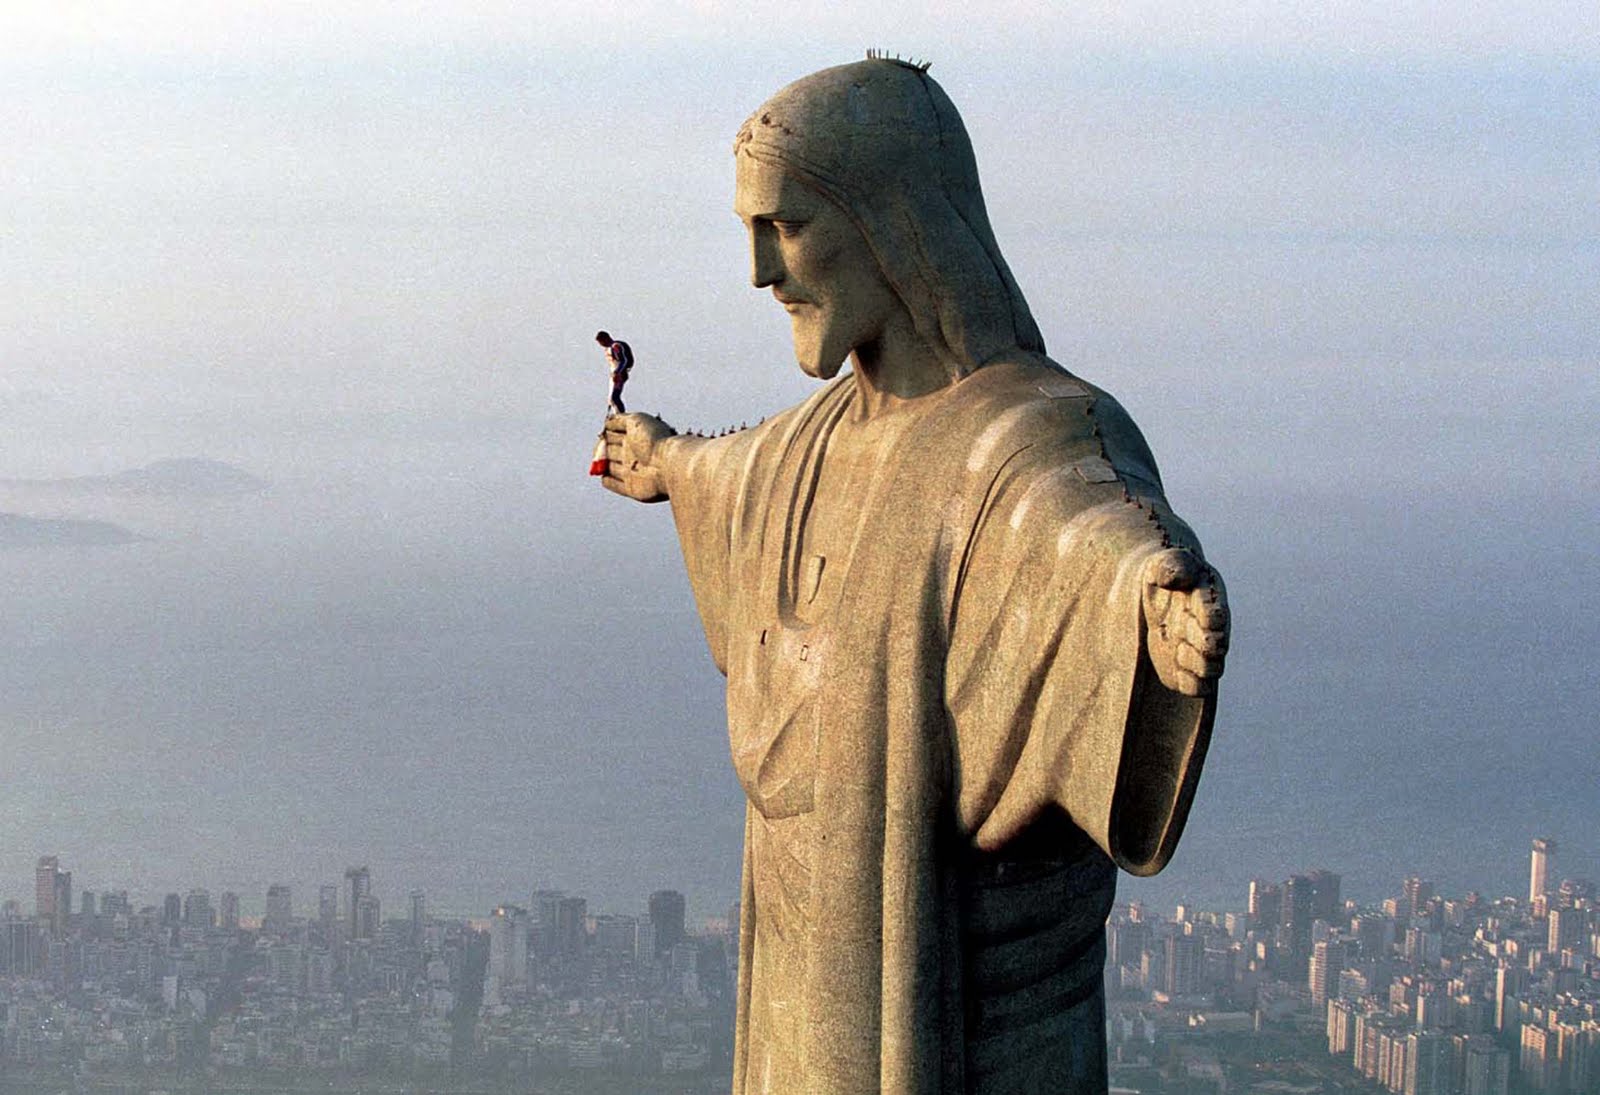 We all know he jumped from outer space, but did you know Felix Bumgardner also base jumped this statue in Rio de Janeiro?